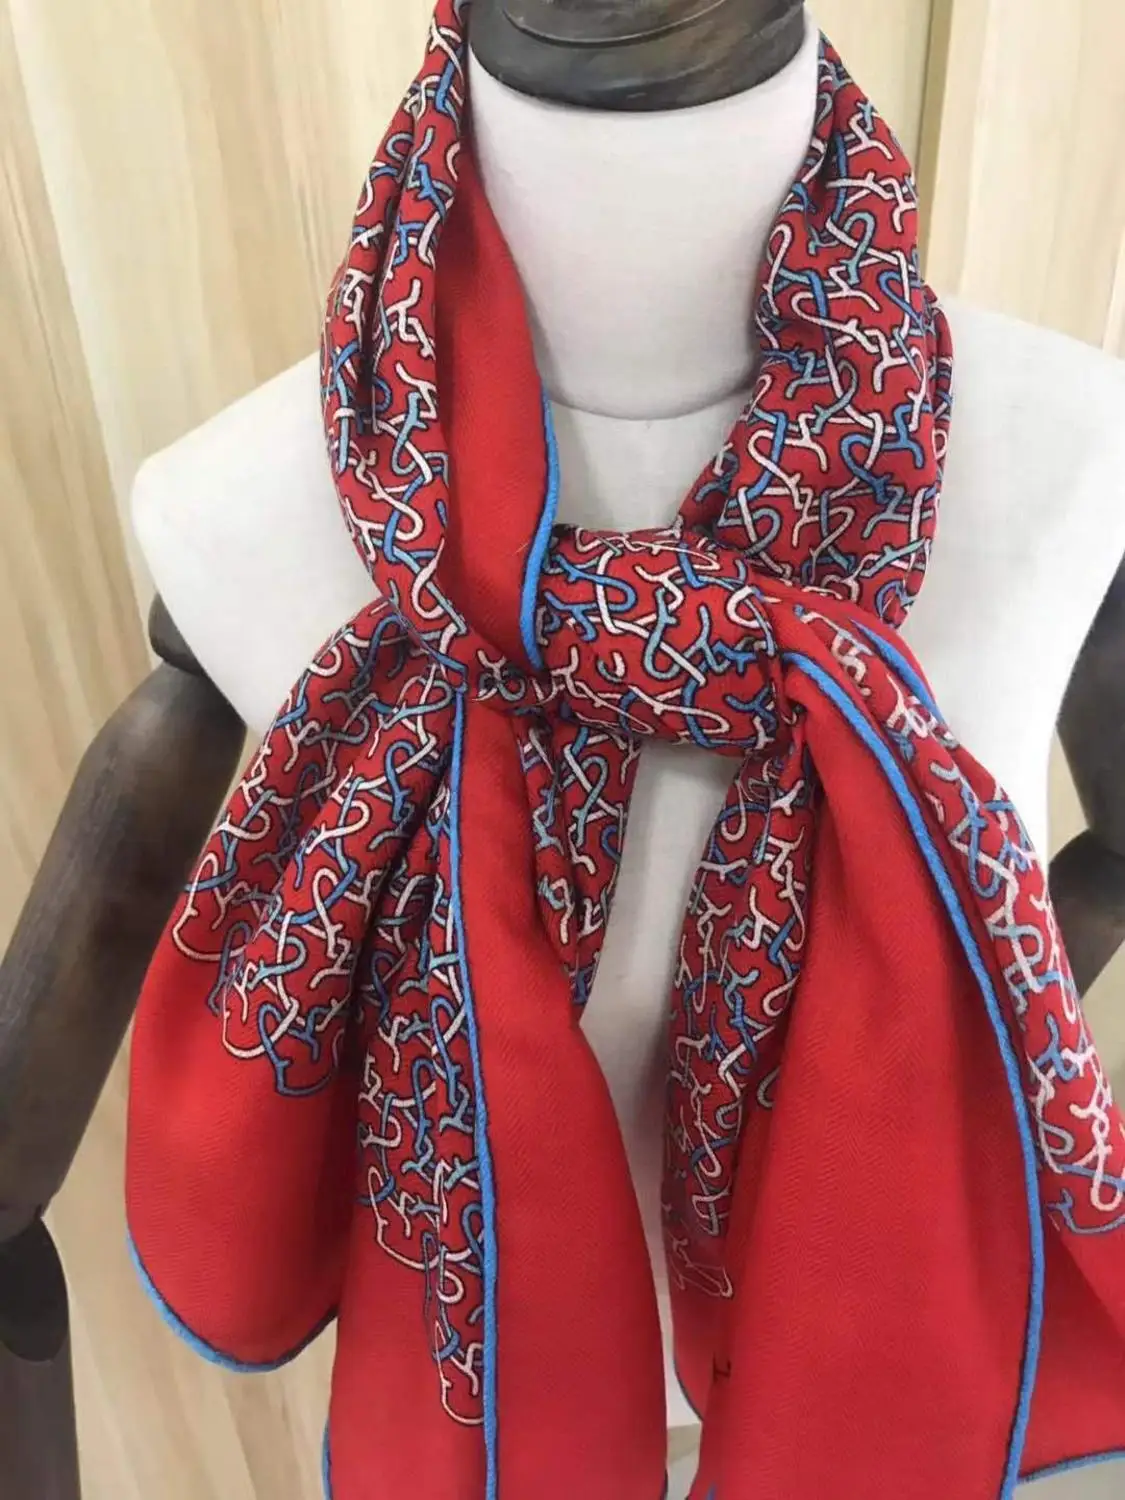 2020 new arrival autumn winter classic design 140*140 cm animal scarf 65% cashmere 35% silk scarf wrap for women lady girl